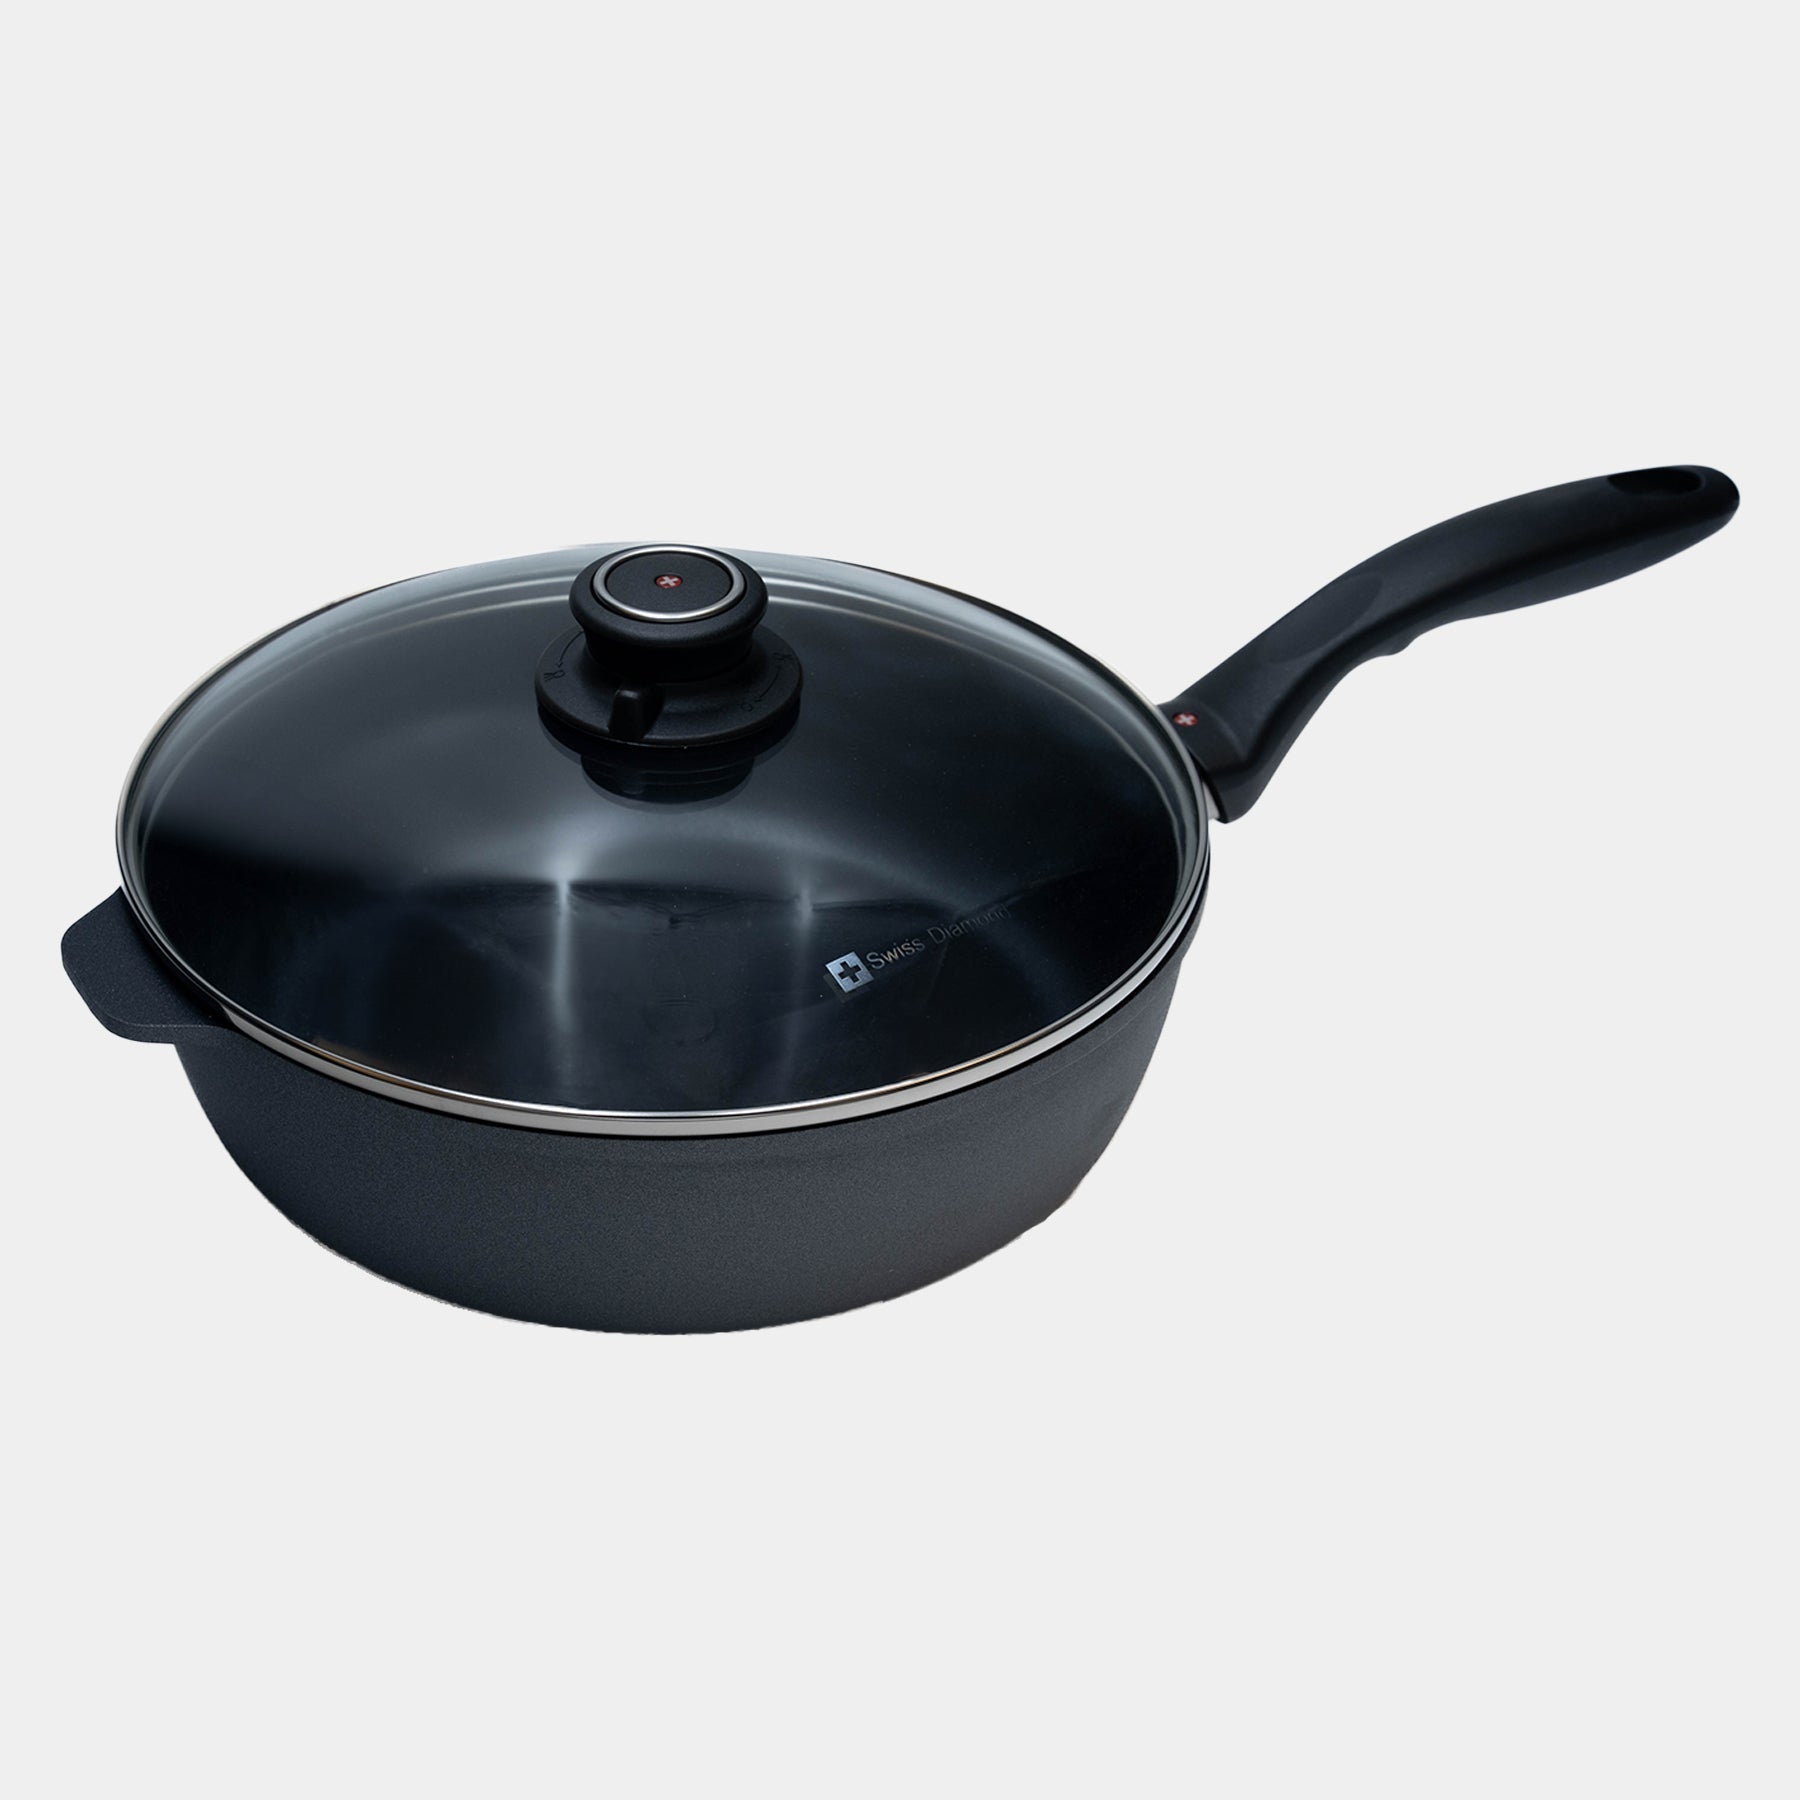 HD Nonstick 3.8 qt Saute Pan with Glass Lid - Induction